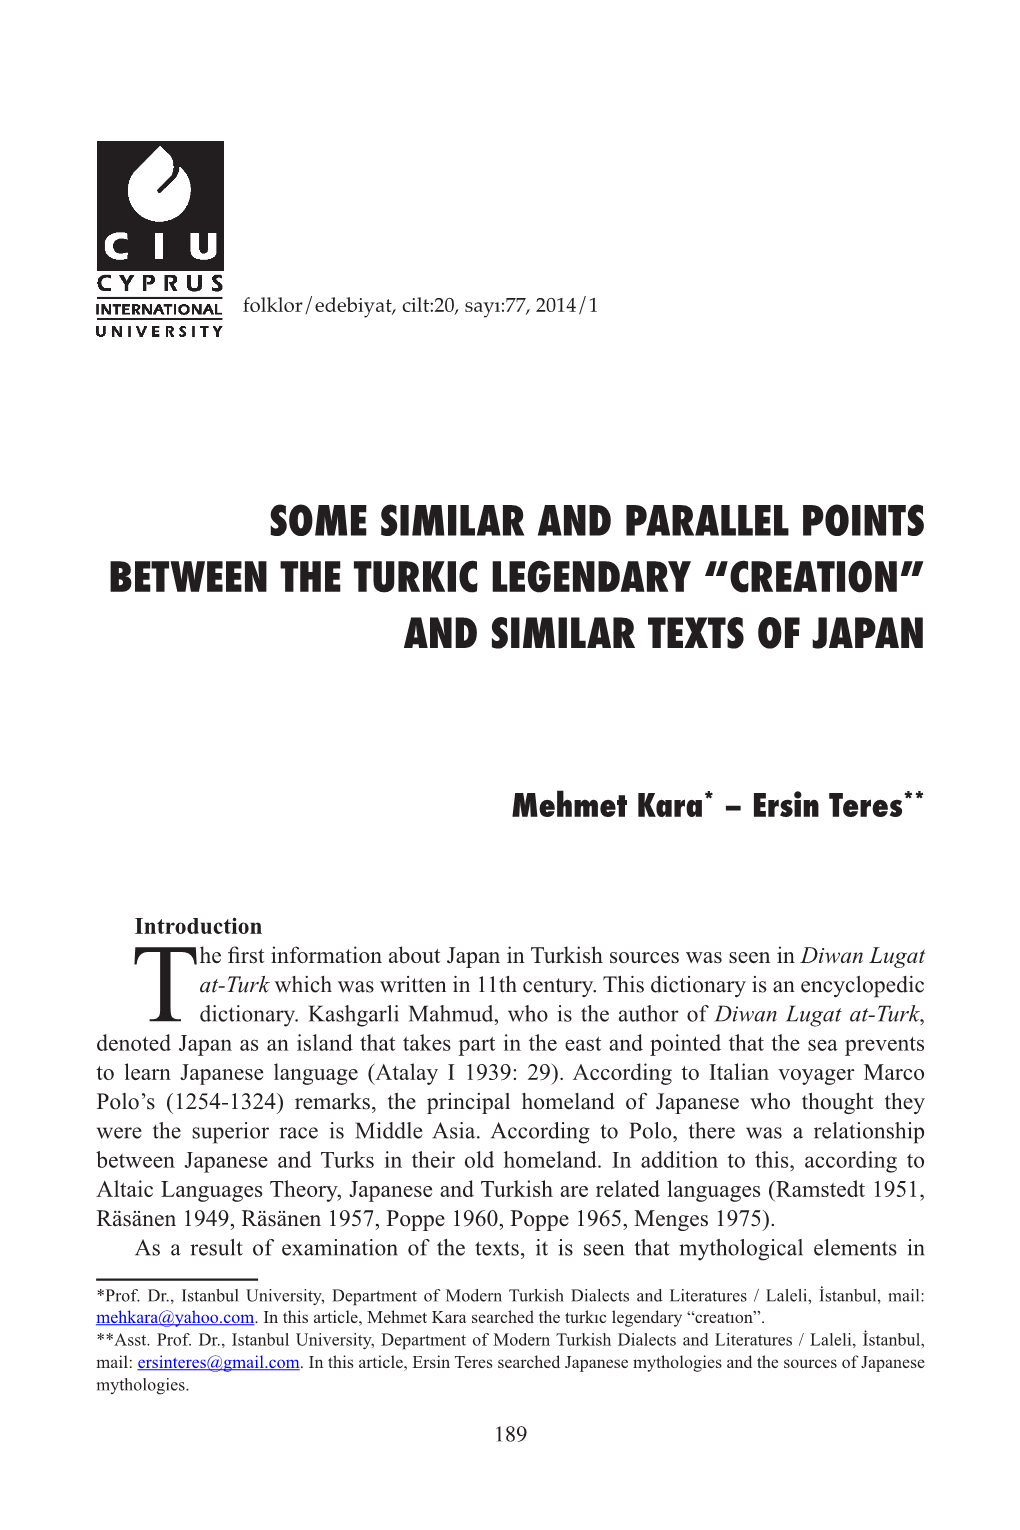 Some Similar and Parallel Points Between the Turkic Legendary “Creation” and Similar Texts of Japan